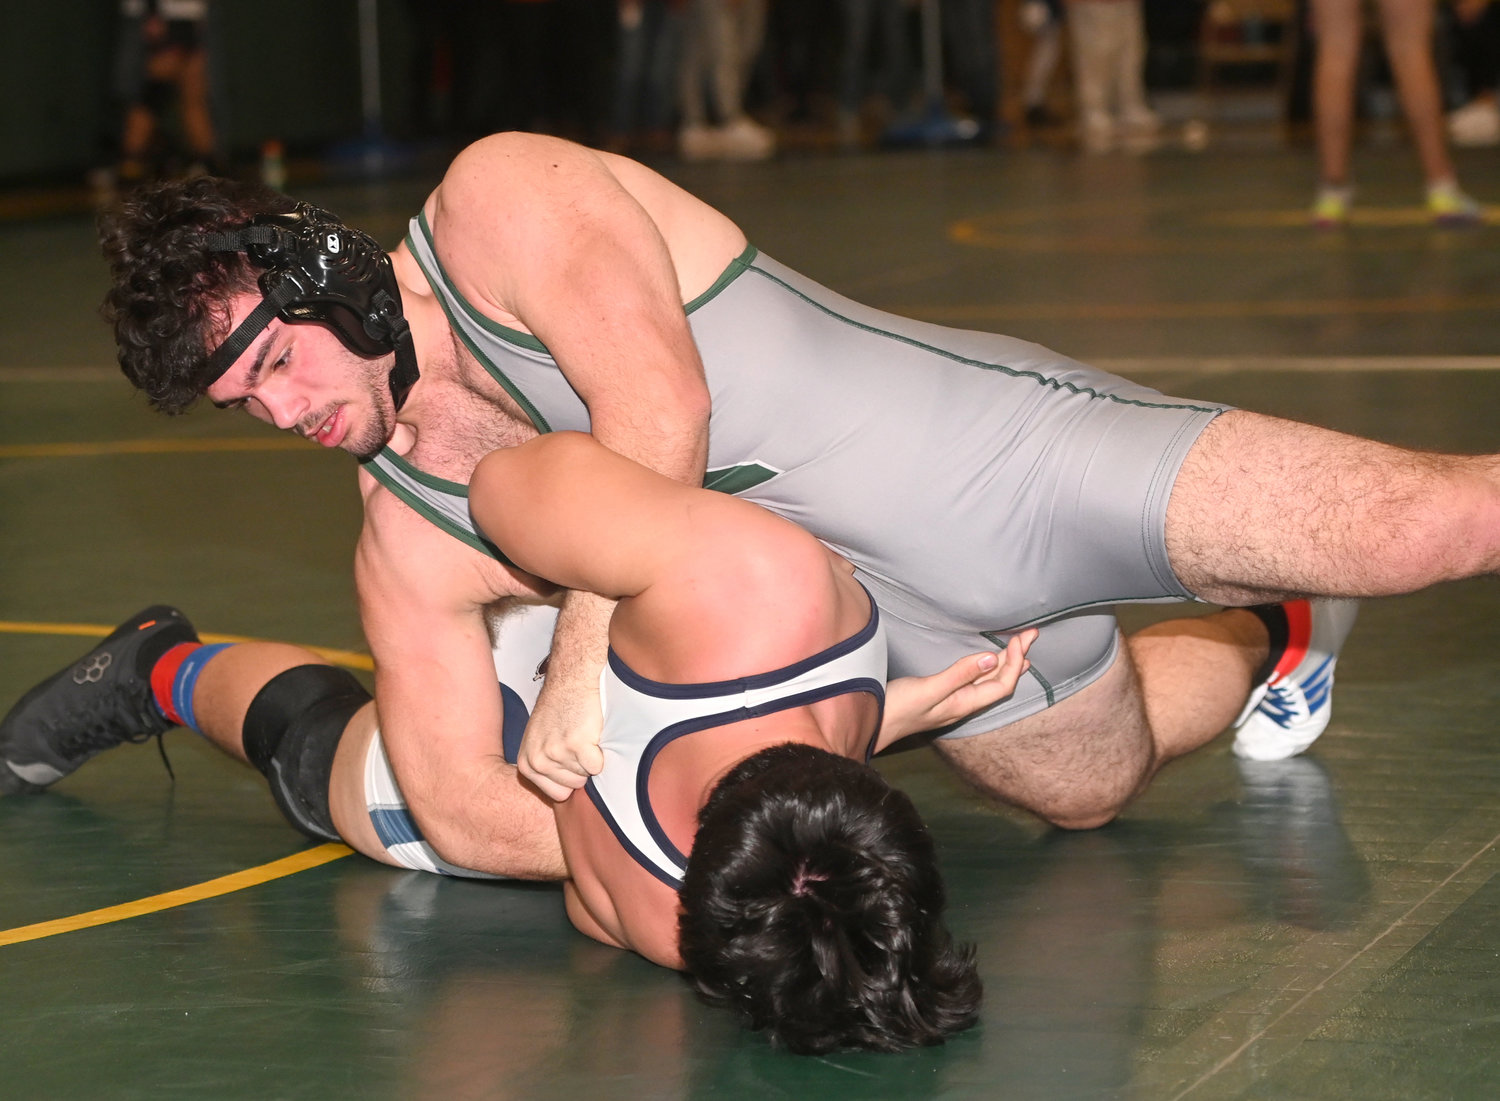 Senior Joshua Amiel takes a record of 32-1 into this weekend’s county tournament at Hofstra where he’ll contend for the 215-pound title.